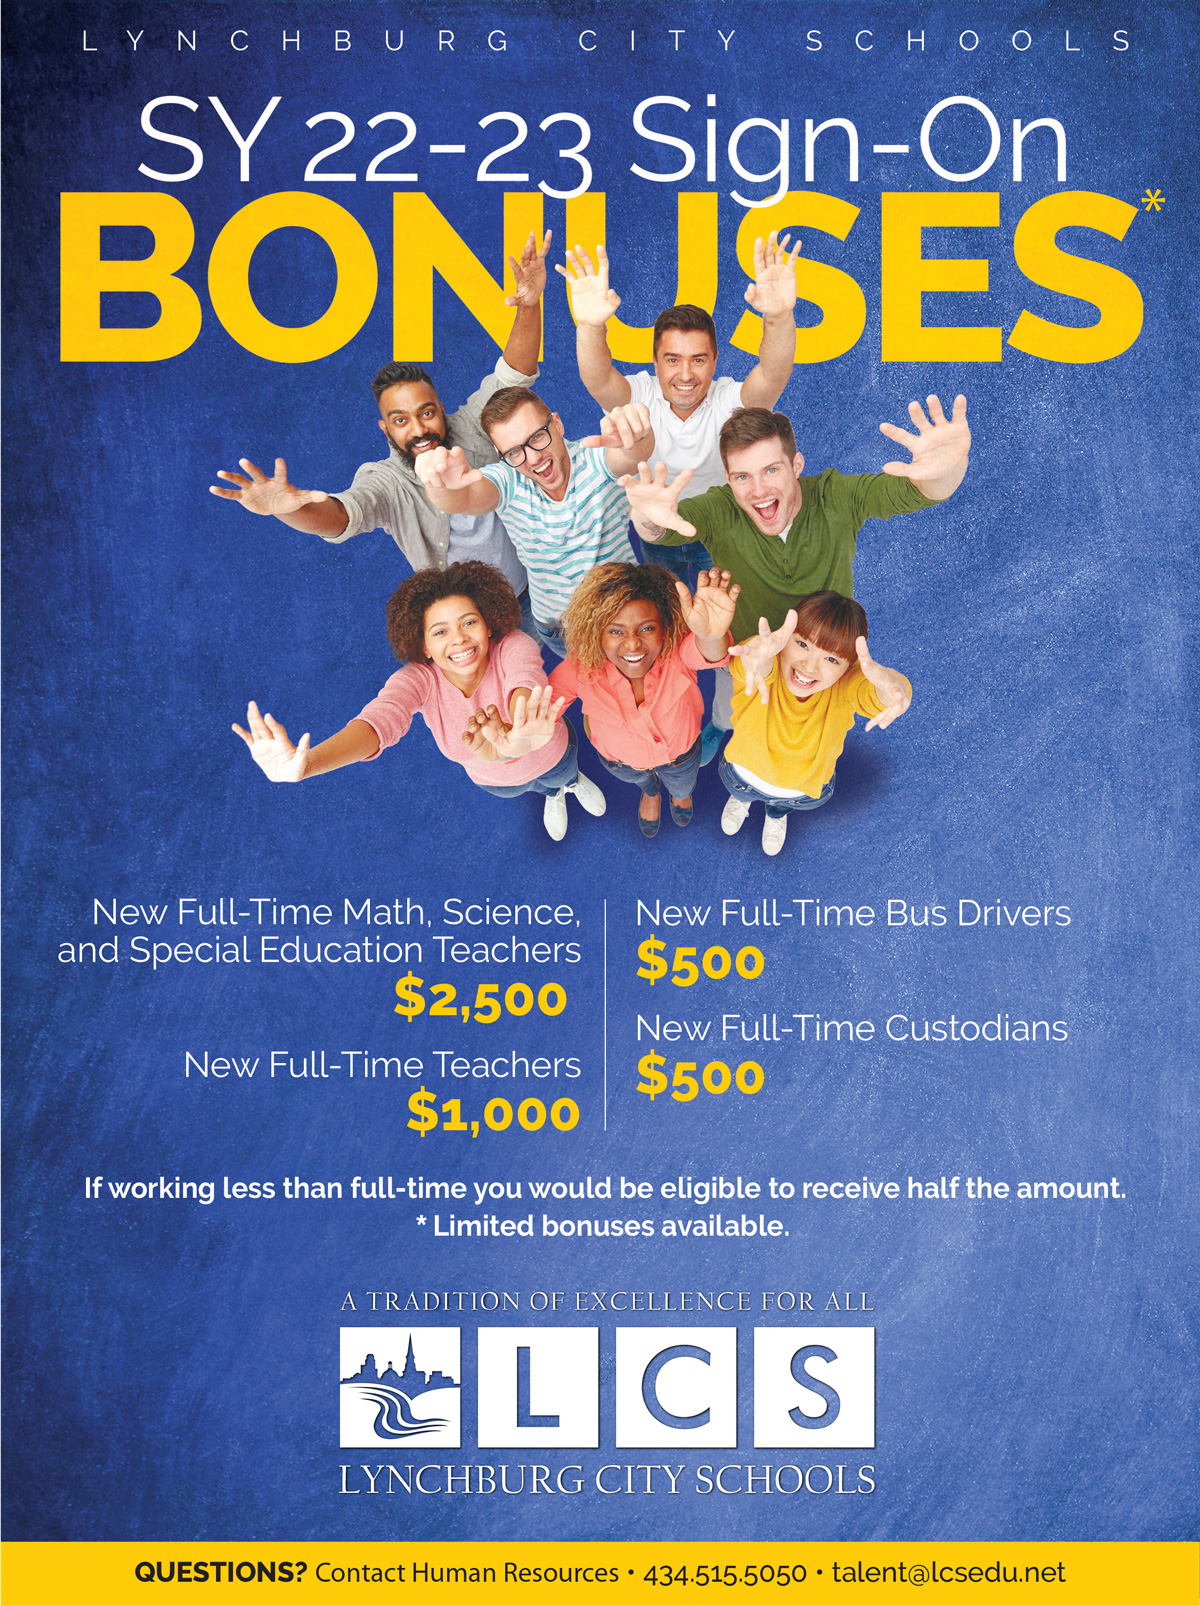 Lynchburg City Schools SY22-23 Sign-On Bonuses • New Full-Time Math, Science, and Special Education Teachers $2,500 • New Full-Time Teachers $1,000 • New Full-Time Bus Drivers $500 • New Full-Time Custodians $500 If working less than full-time you would be eligible to receive half the amount. *Limited bonuses available. QUESTIONS? Contact Human Resources • (434) 515-5050 • talent@lcsedu.net